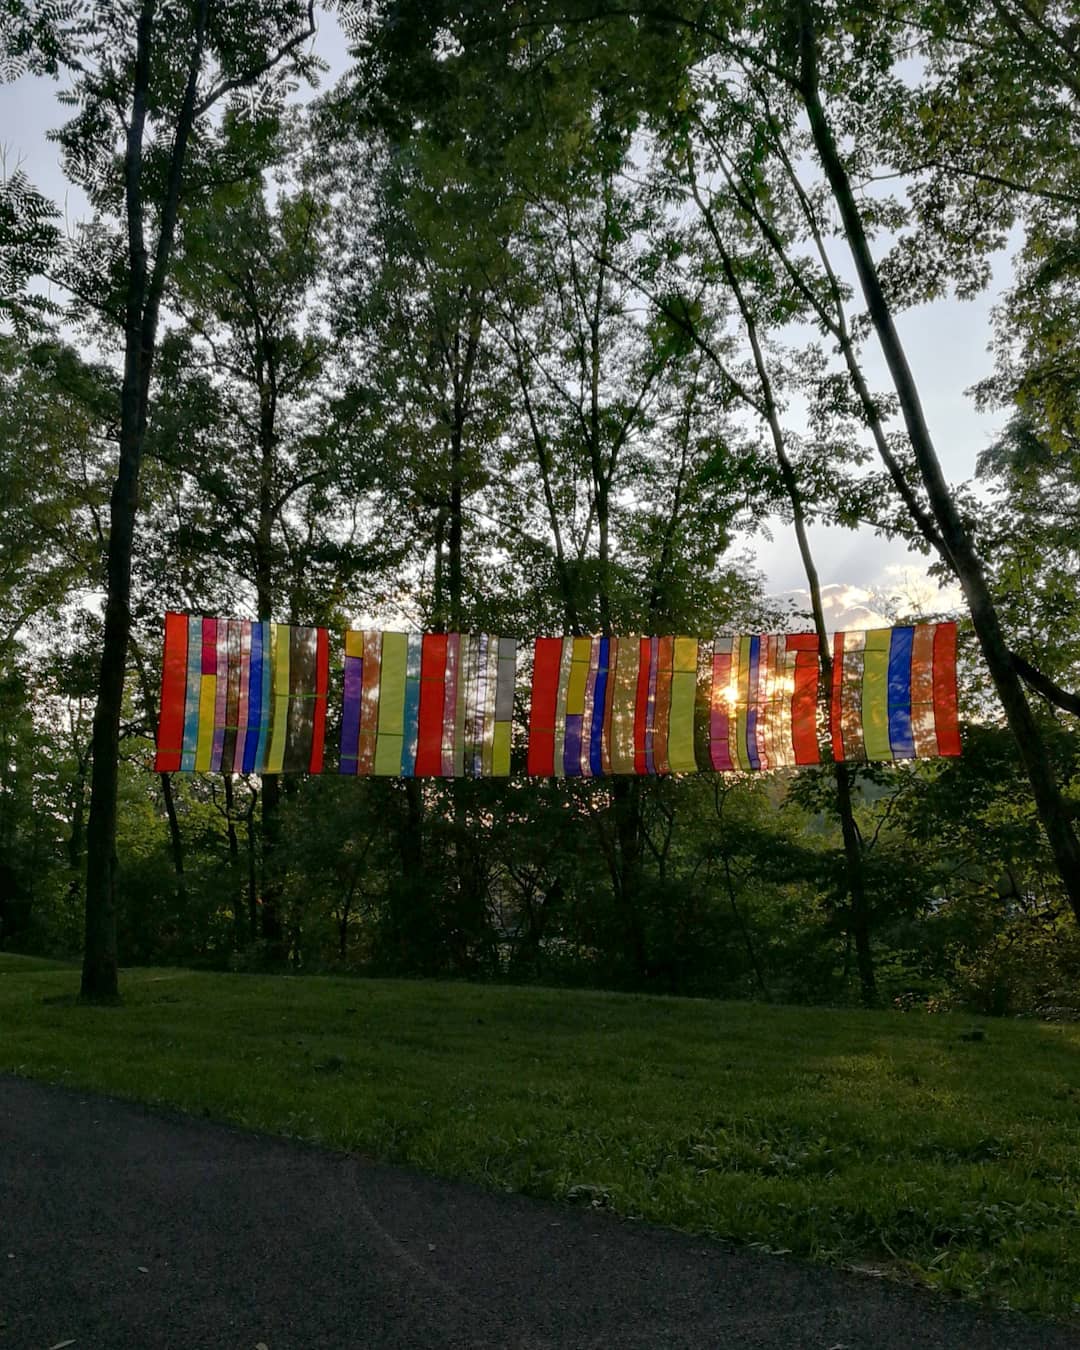 Stretched between two trees, a piece of the outdoor art installation Site Lines on the Karl Stirner Arts Trail by sculptor Rachel Hayes features colorful construction mesh and nylon flag fabric.